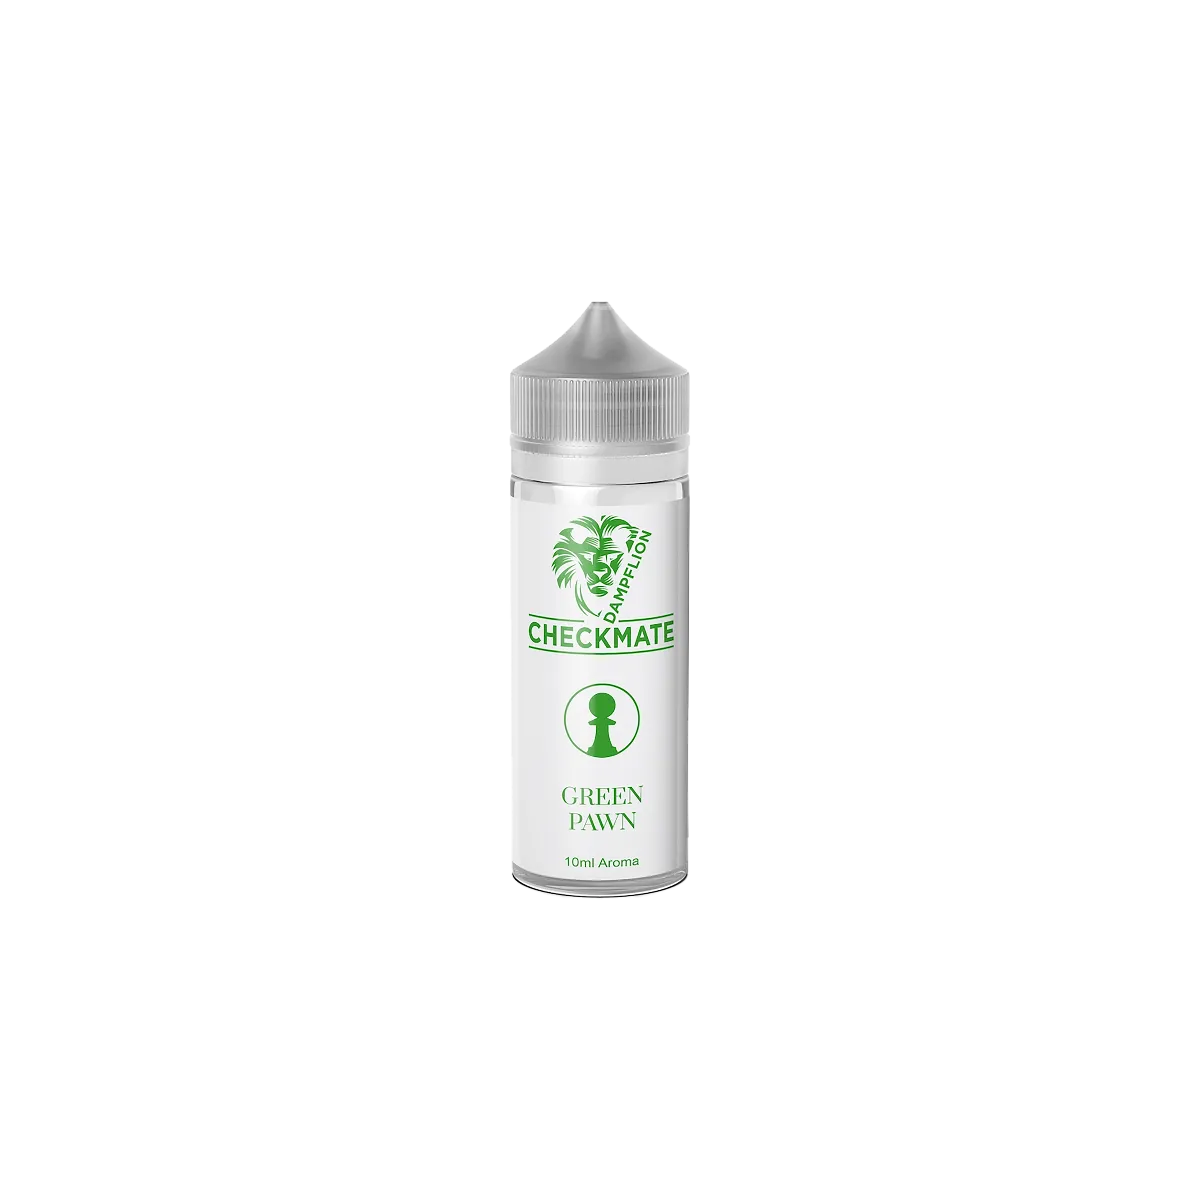 Dampflion Checkmate Aroma Longfill Green Pawn 10ml